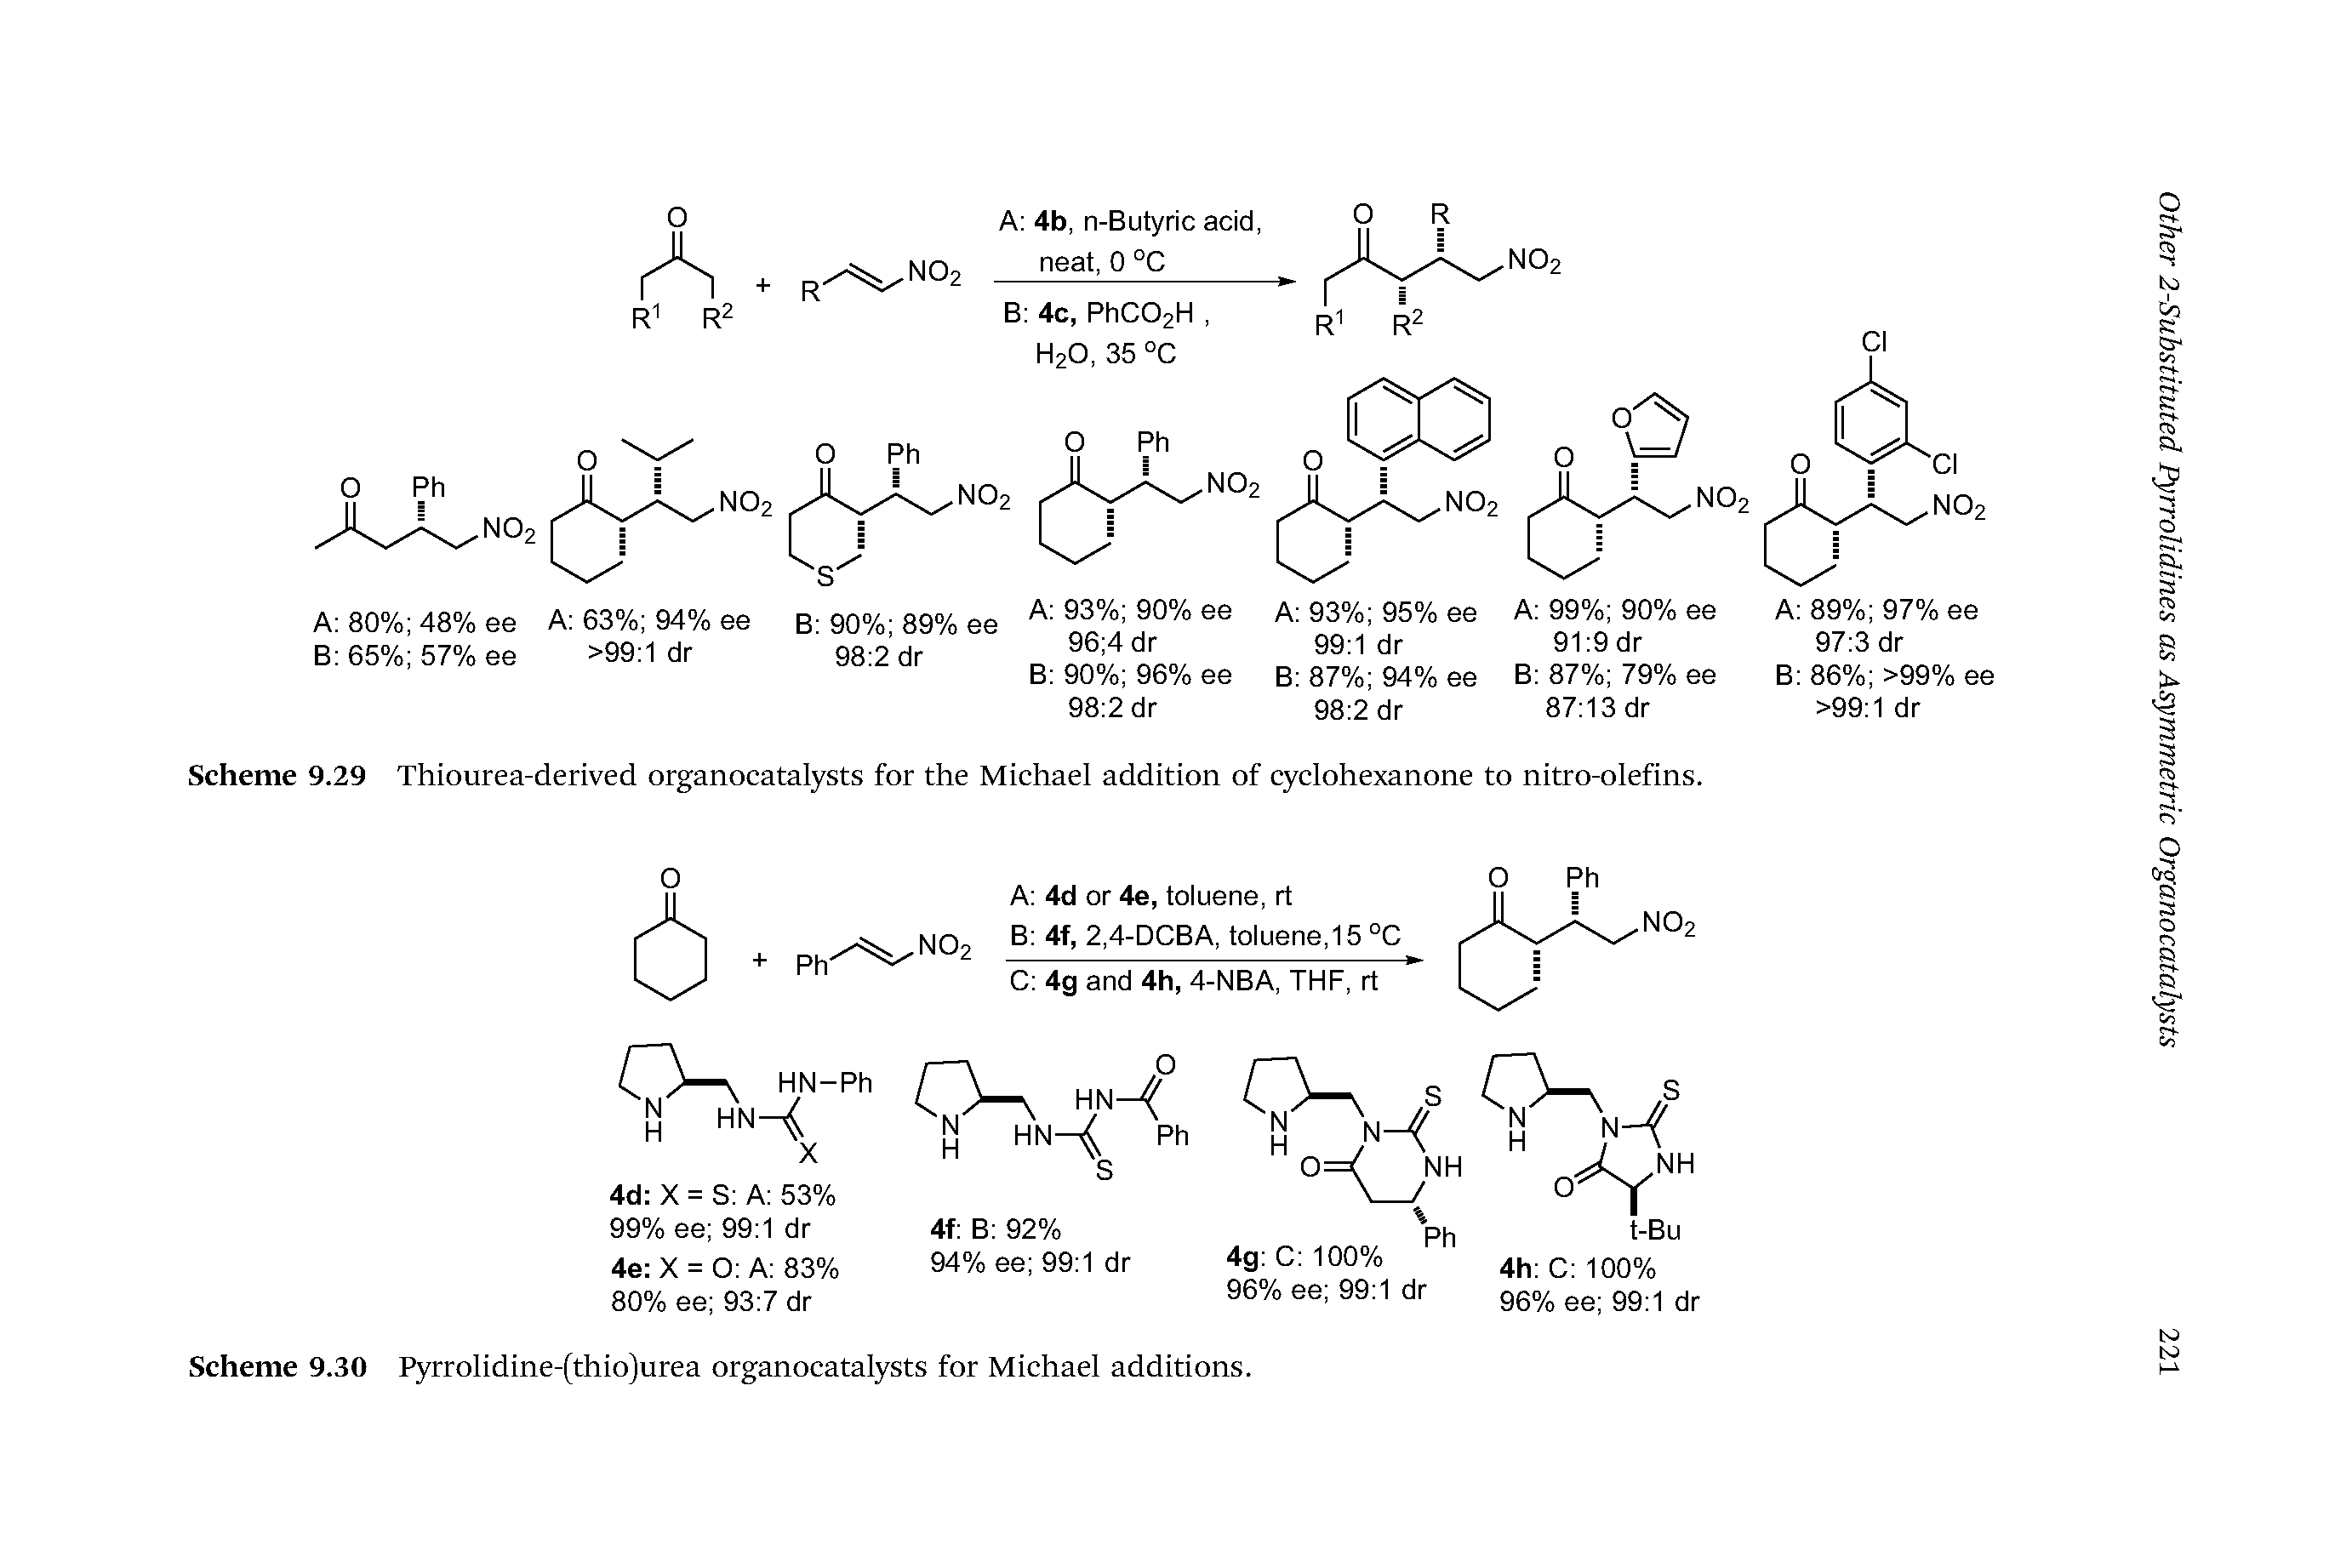 Scheme 9.29 Thiourea-derived organocatalysts for the Michael addition of cyclohexanone to nitro-olefins.